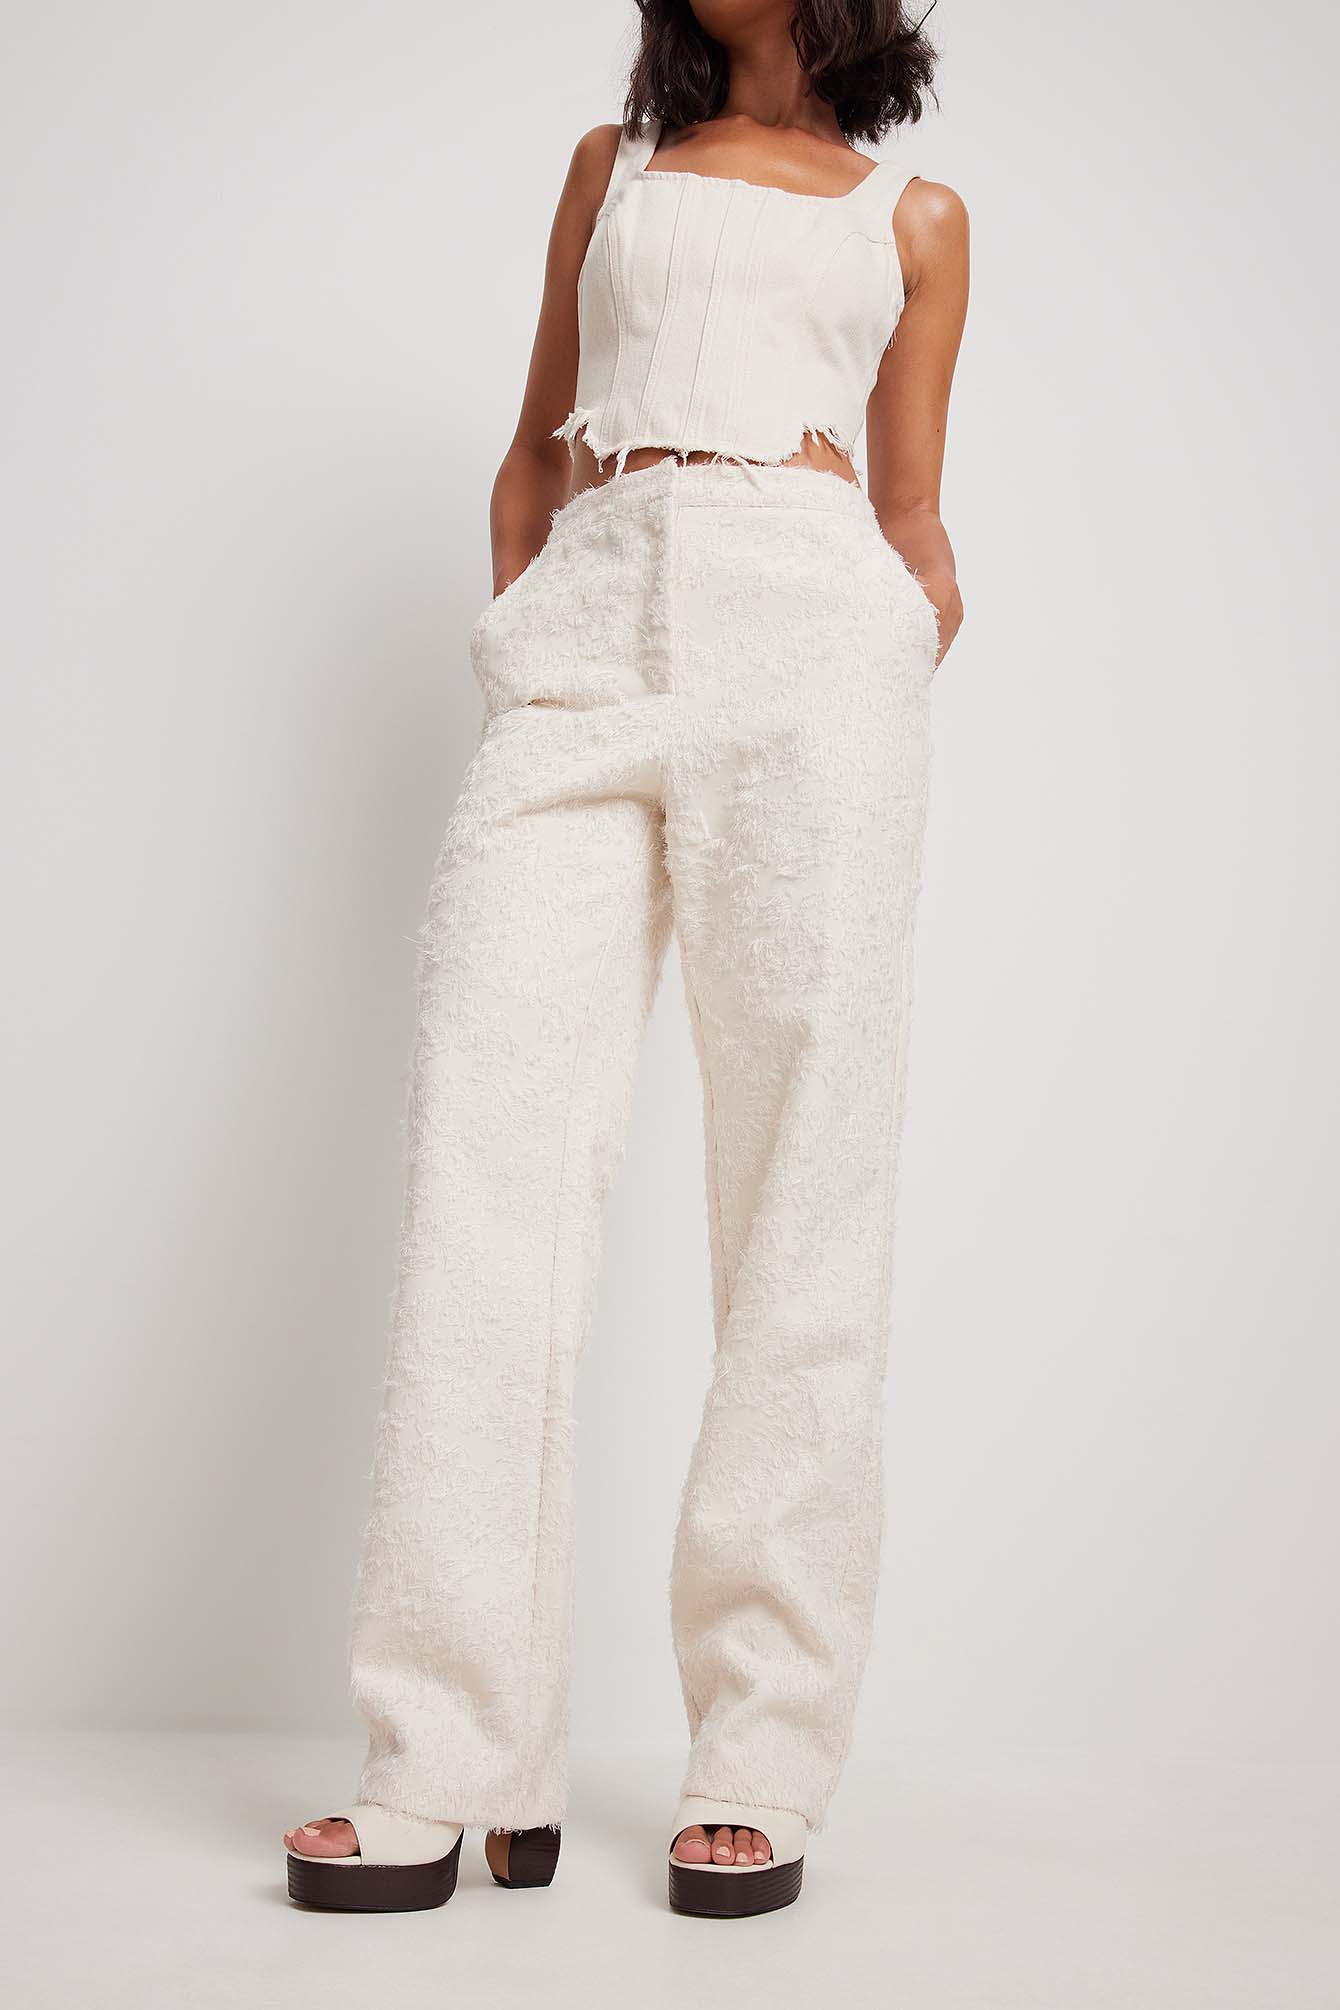 NA-KD Trend Fringe Detailed Suit Pants - Offwhite